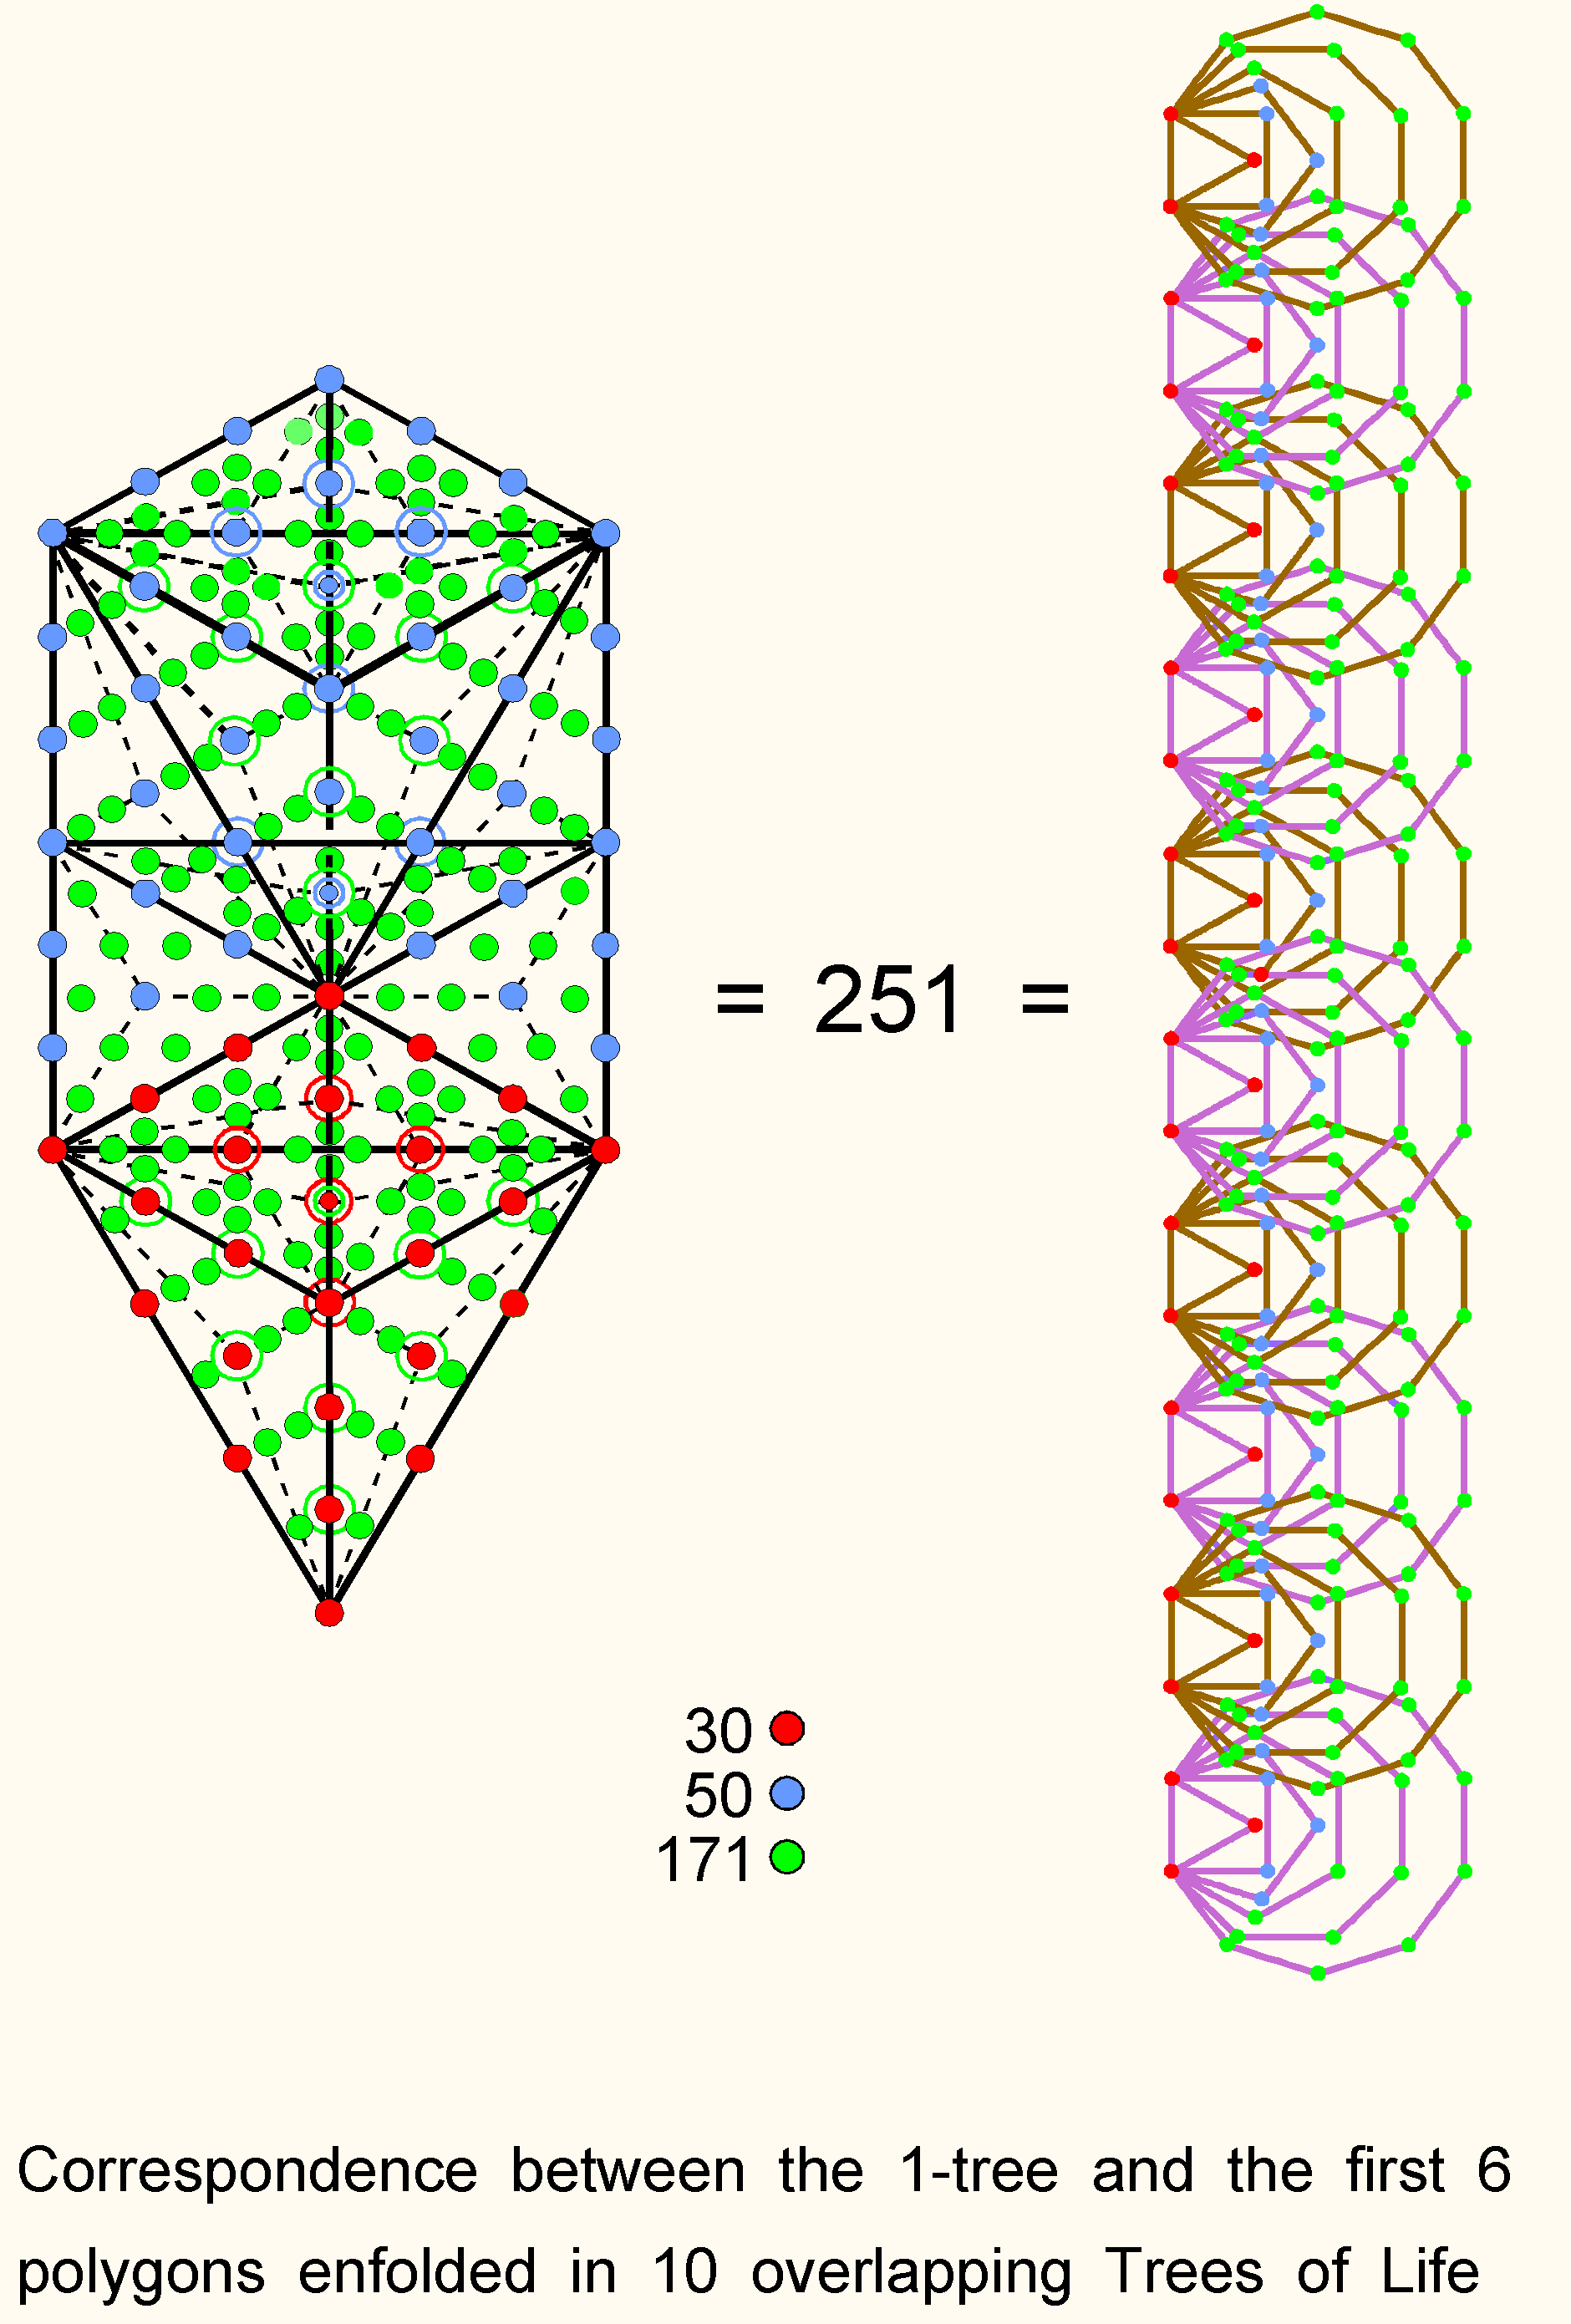 Correspondence between 1-tree & 1st 6 polygons enfolded in 10-tree